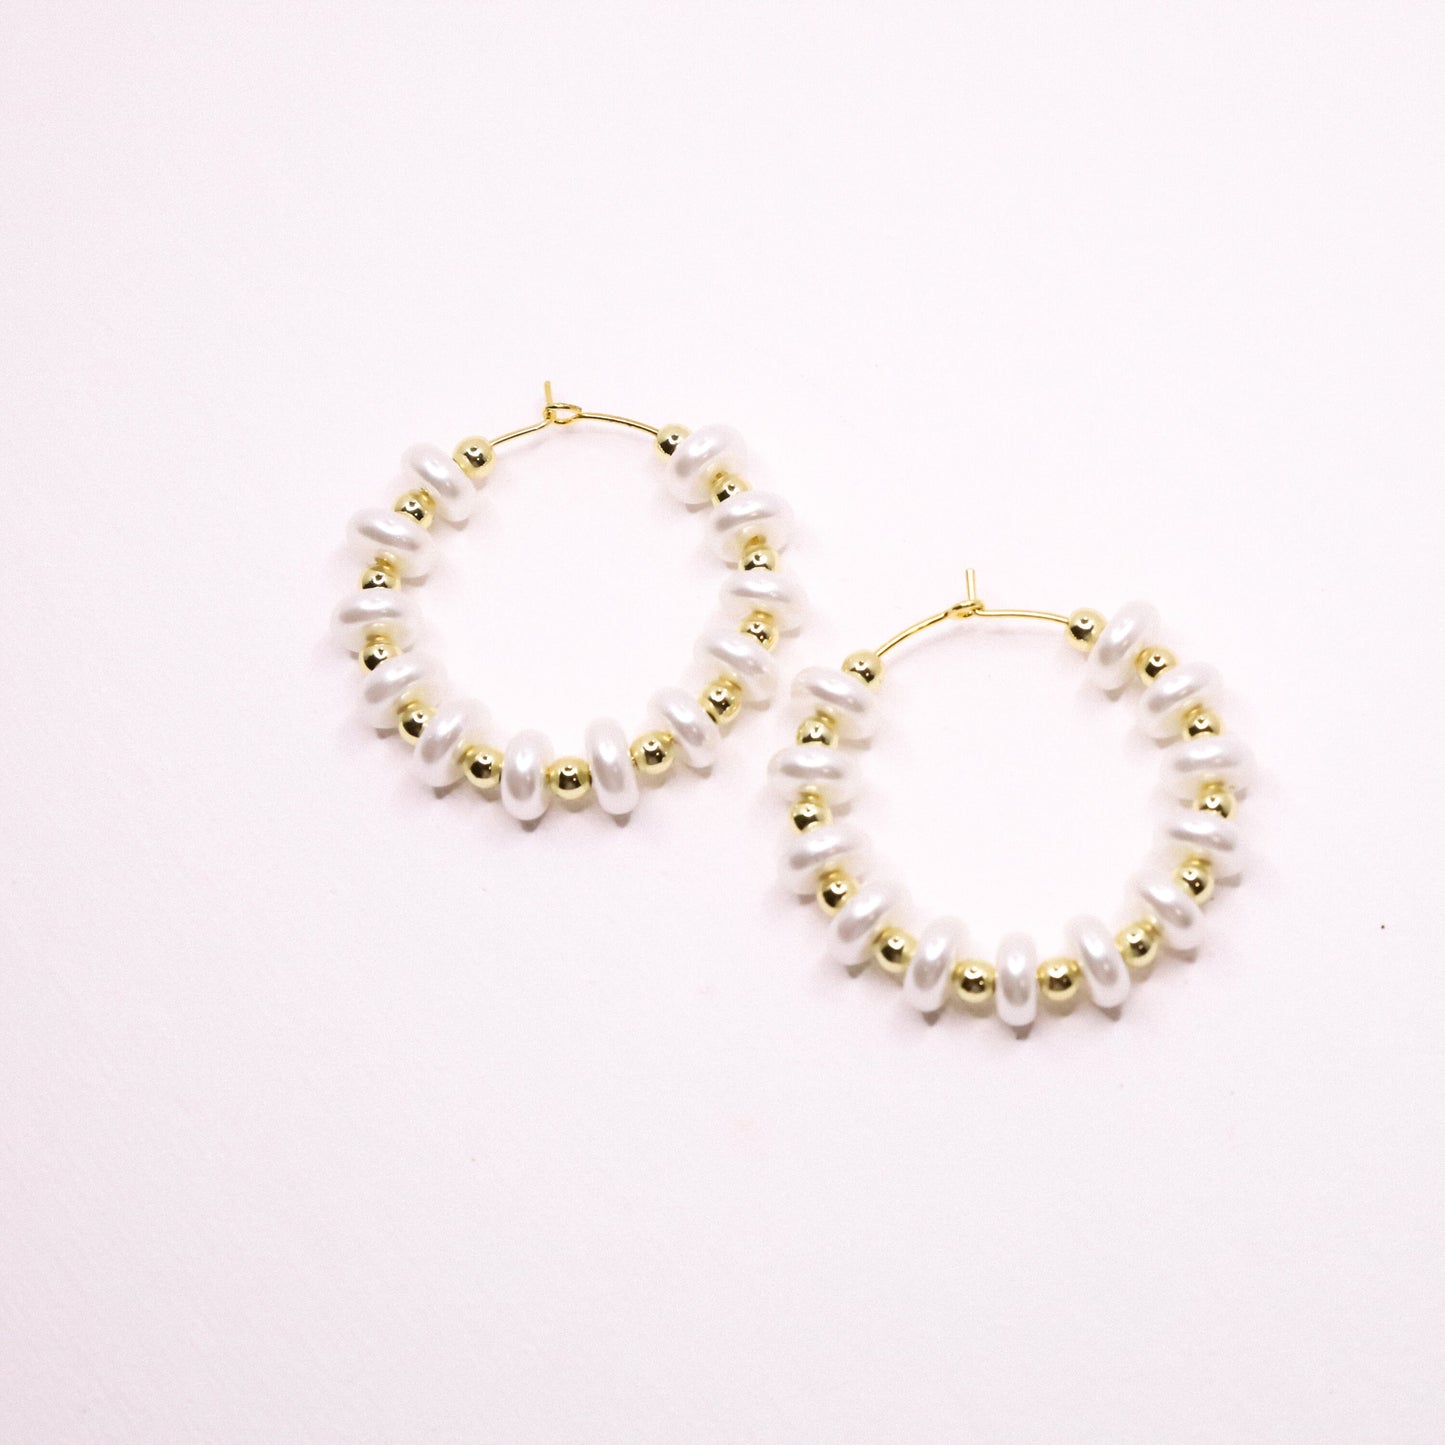 Gold hoop earrings with Gold Filled Beads and Freshwater Pearls